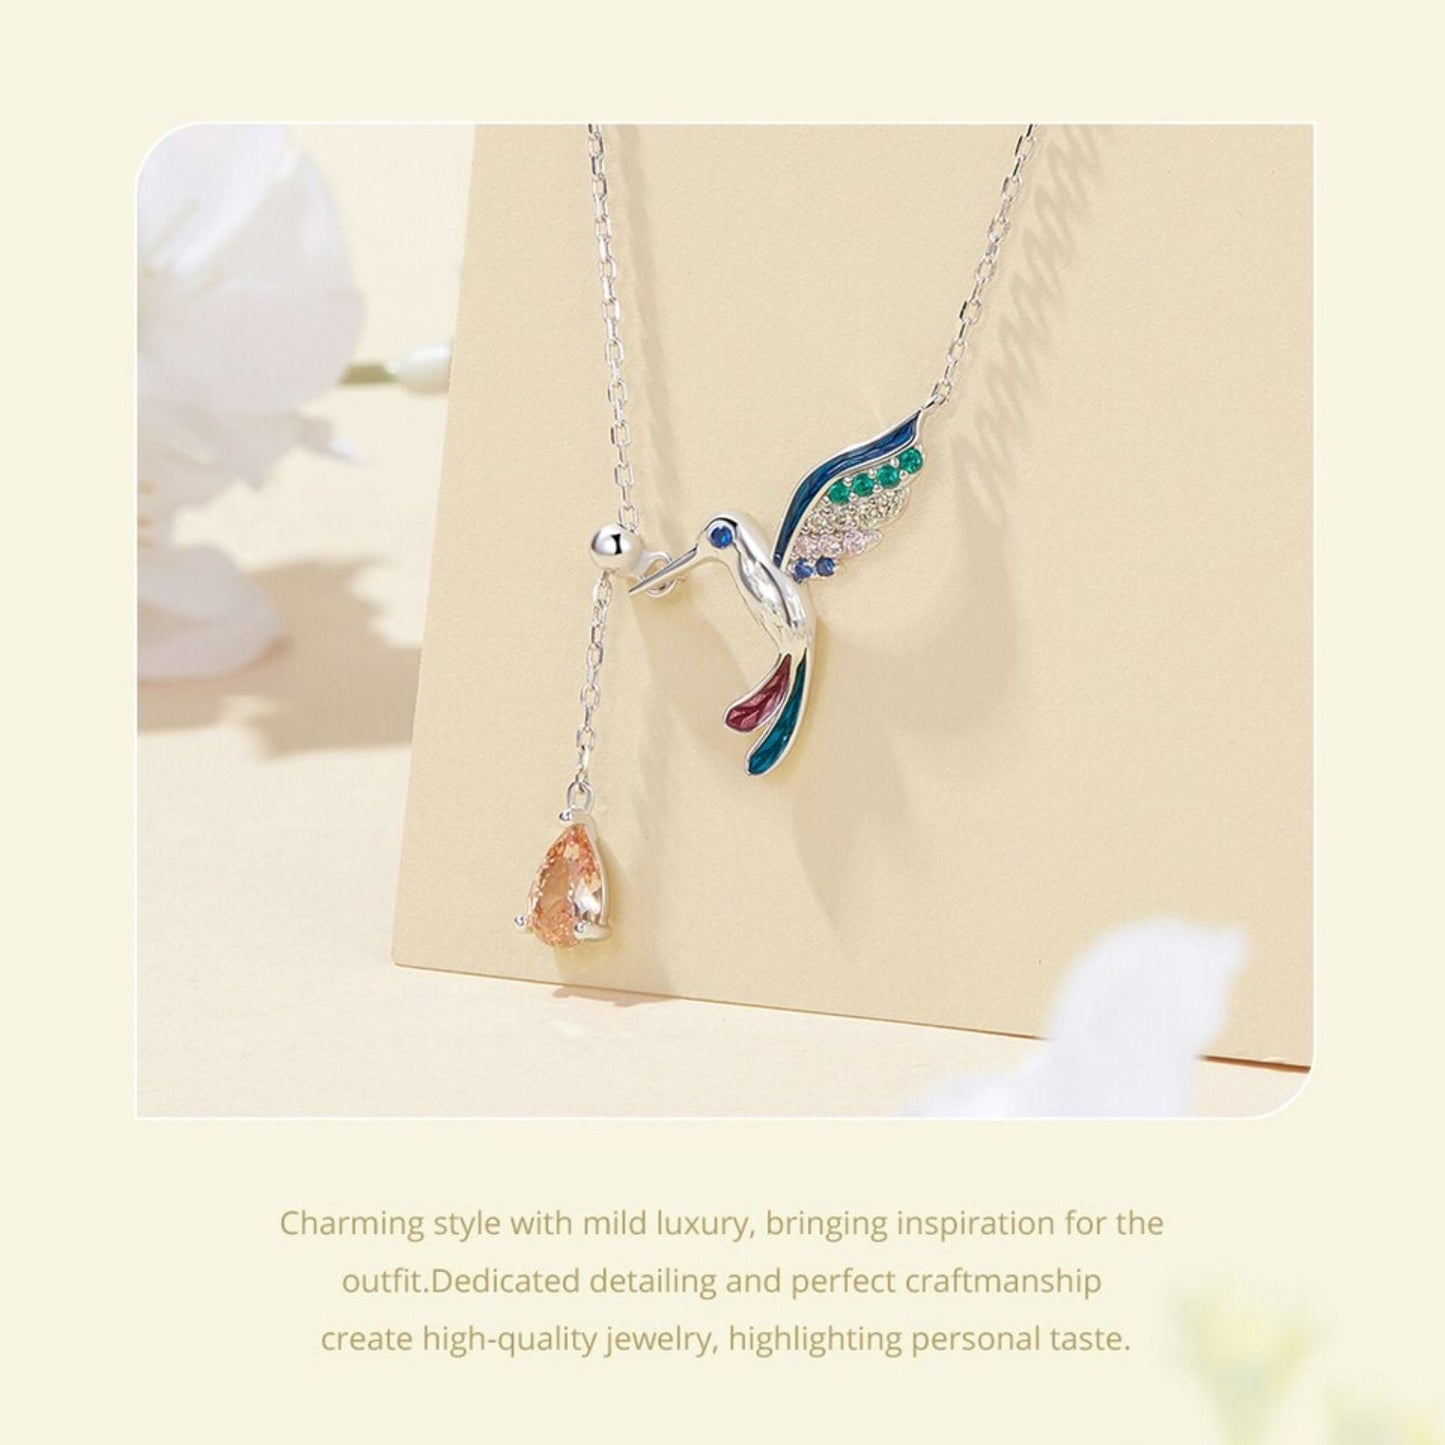 Hummingbird Shape S925 Sterling Silver Necklace with Zirconia Diamond - Exquisite Jewelry